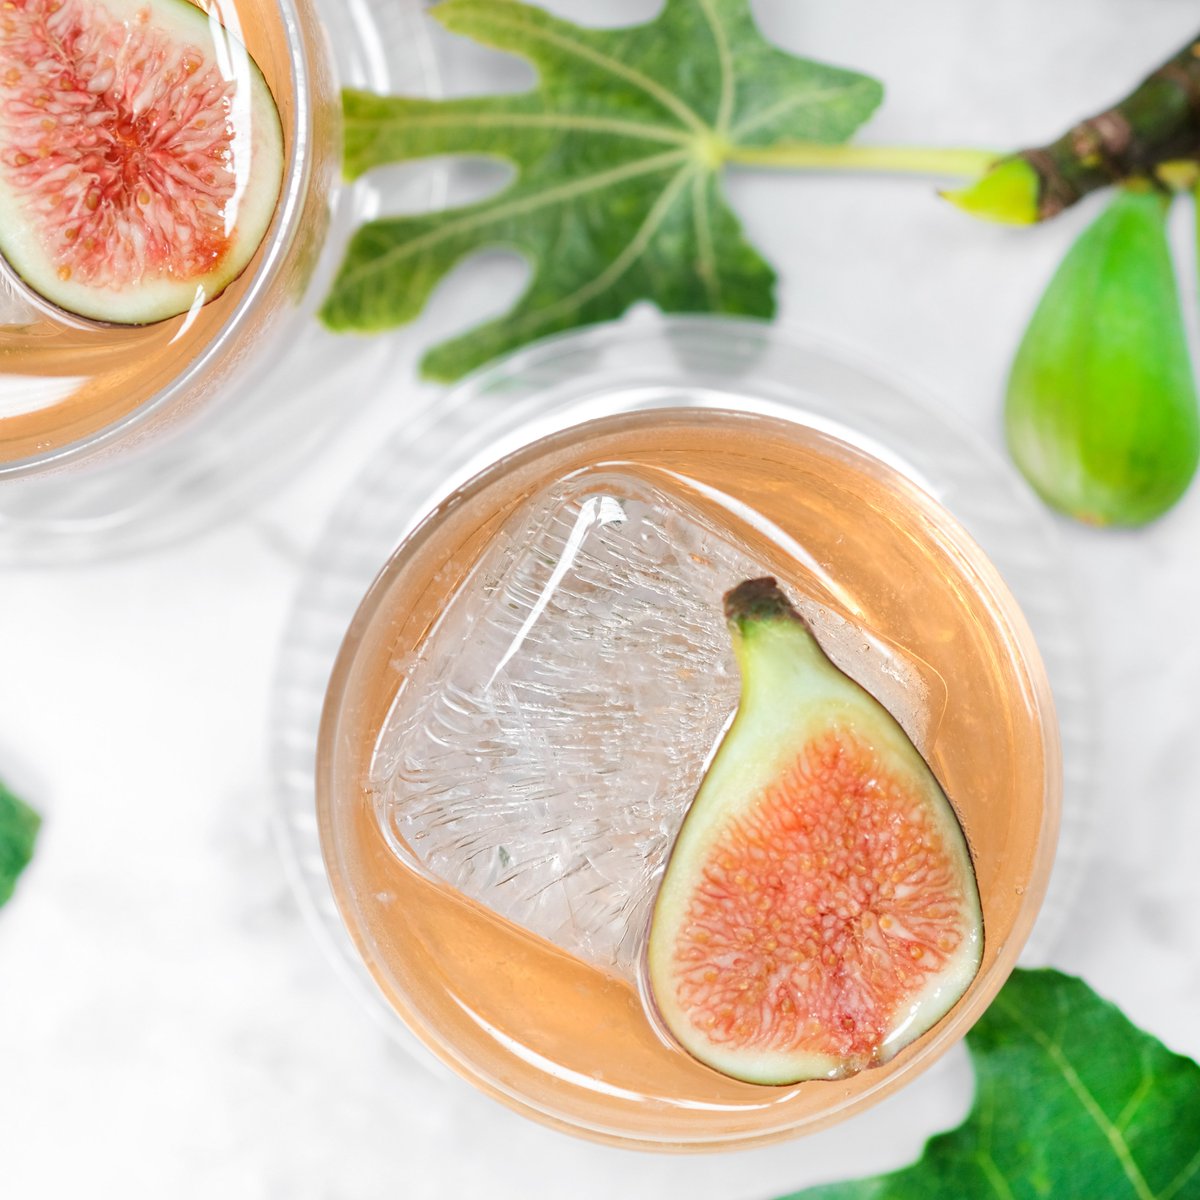 Fig season! Savor the end of summer with our blushing Fig & Vanilla Fizz that blends vanilla's caramel, NOLET'S fruity botanicals, and seasonal figs. 🍂🍹 Crafted with a pre-prepped syrup for extra flair. ✨ noletsgin.com/recipe/fig-van… #SeasonalSip #NOLETS #Gin #Cocktail #Recipe